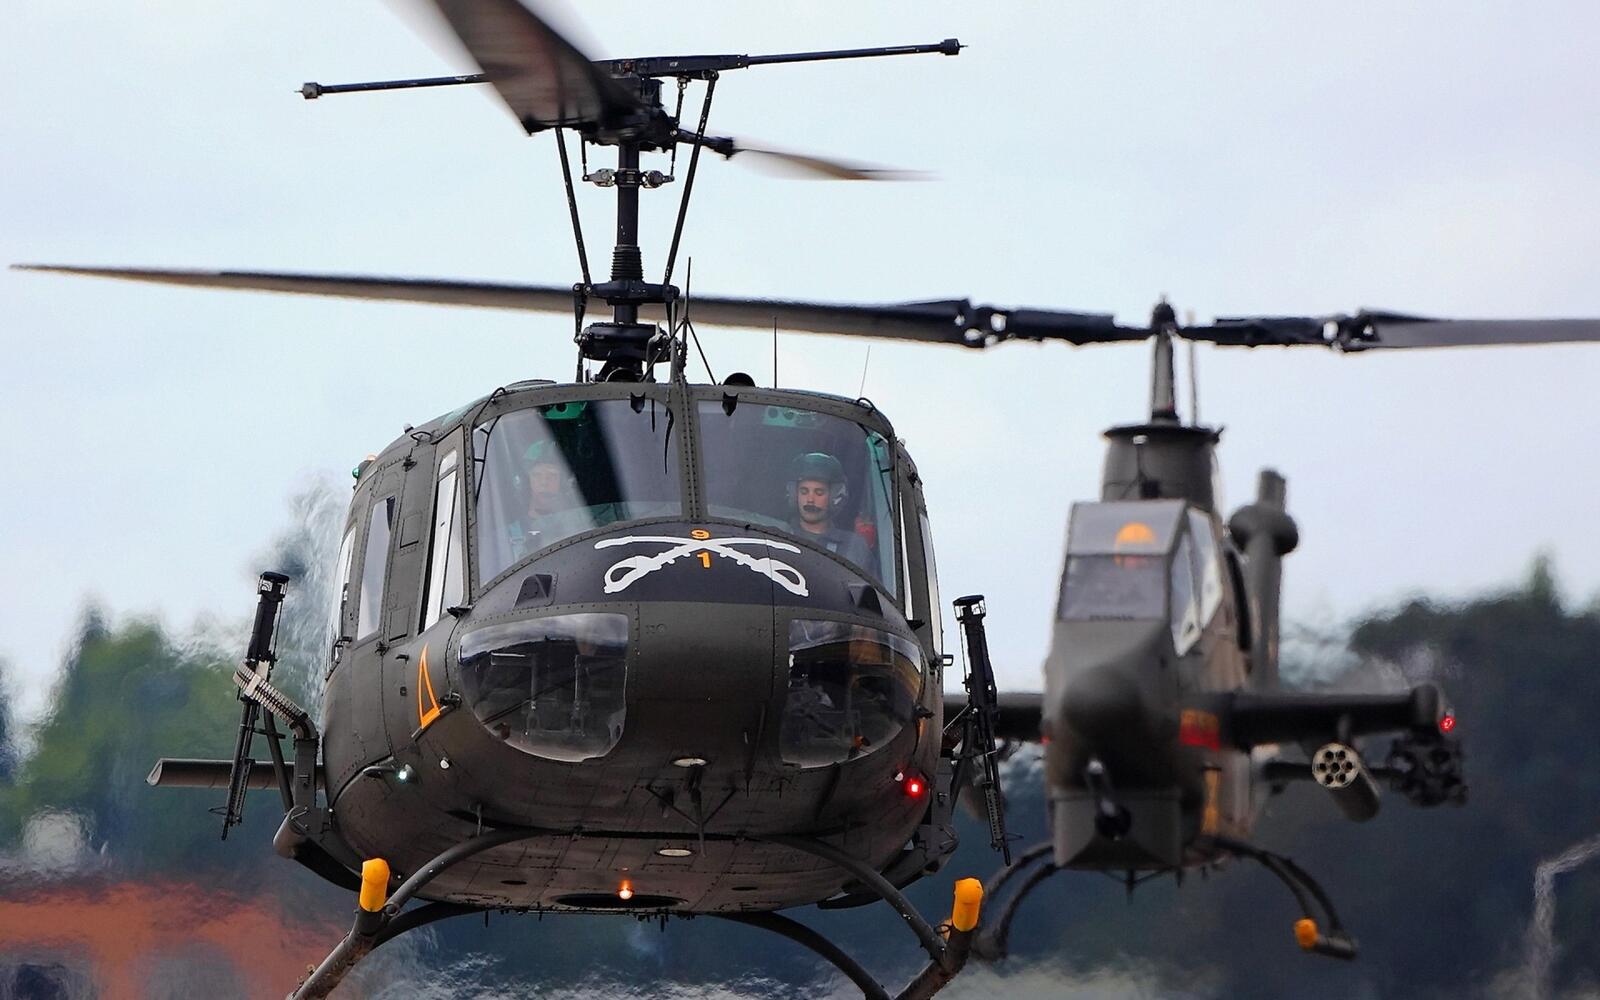 Wallpapers aviation helicopters military on the desktop